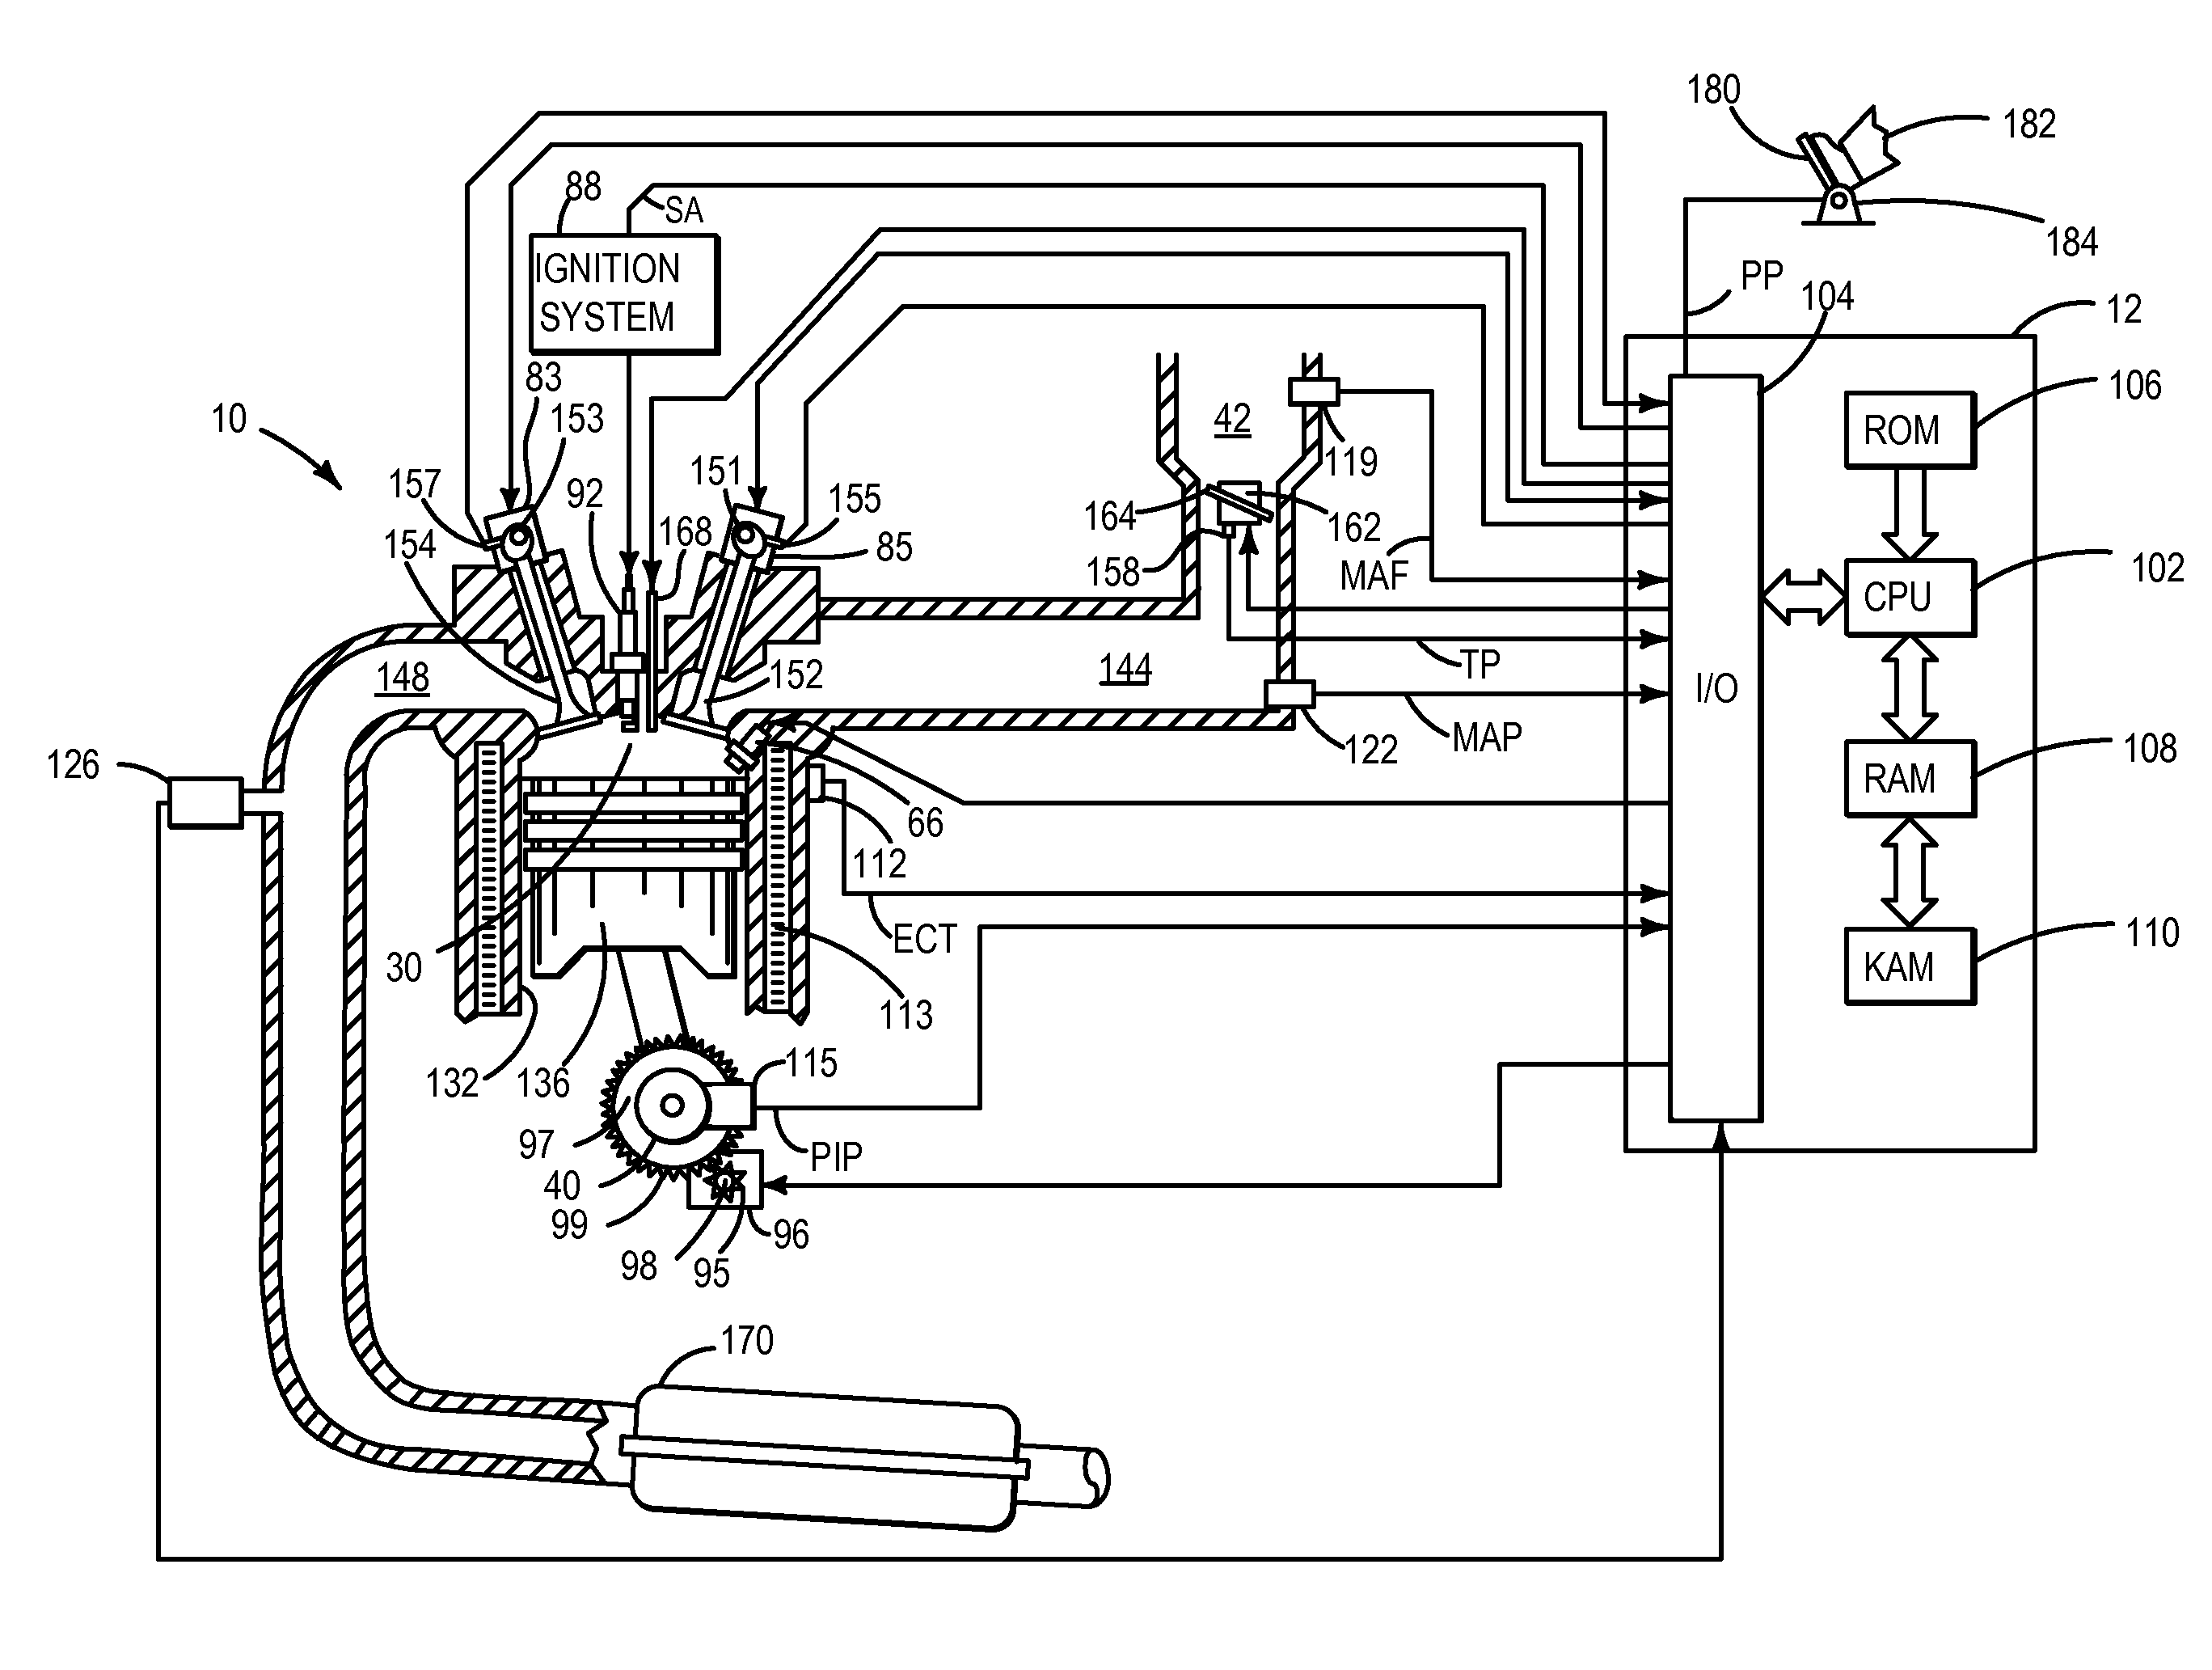 Systems and methods for transient control